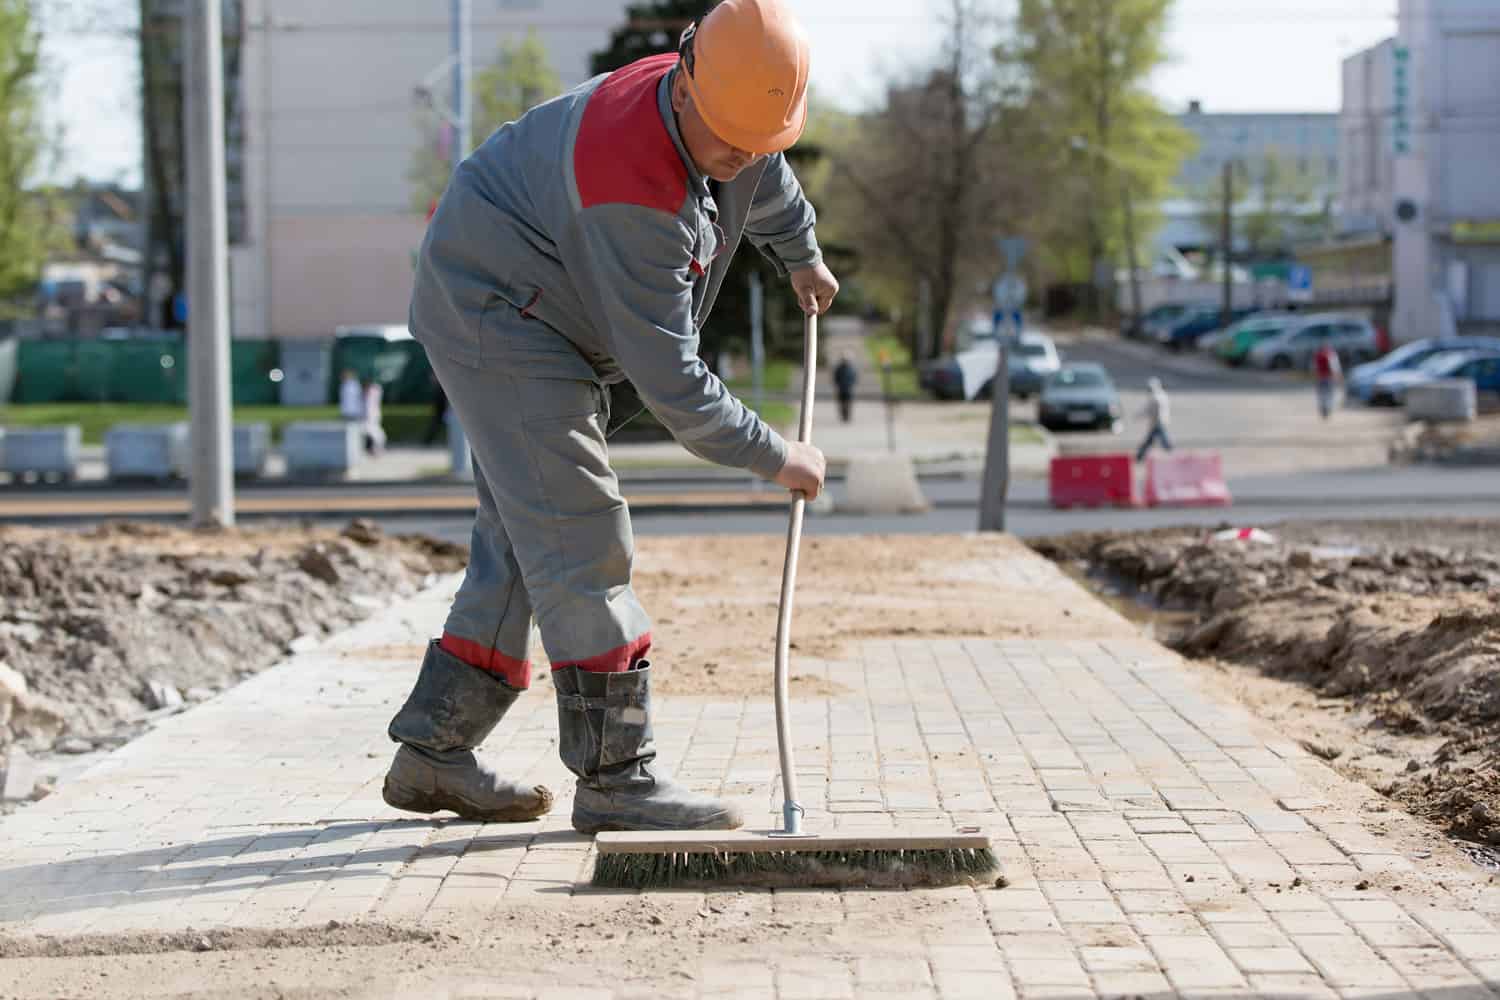 Construction worker grouting dry sand with brush into paver bricks joints during road works
